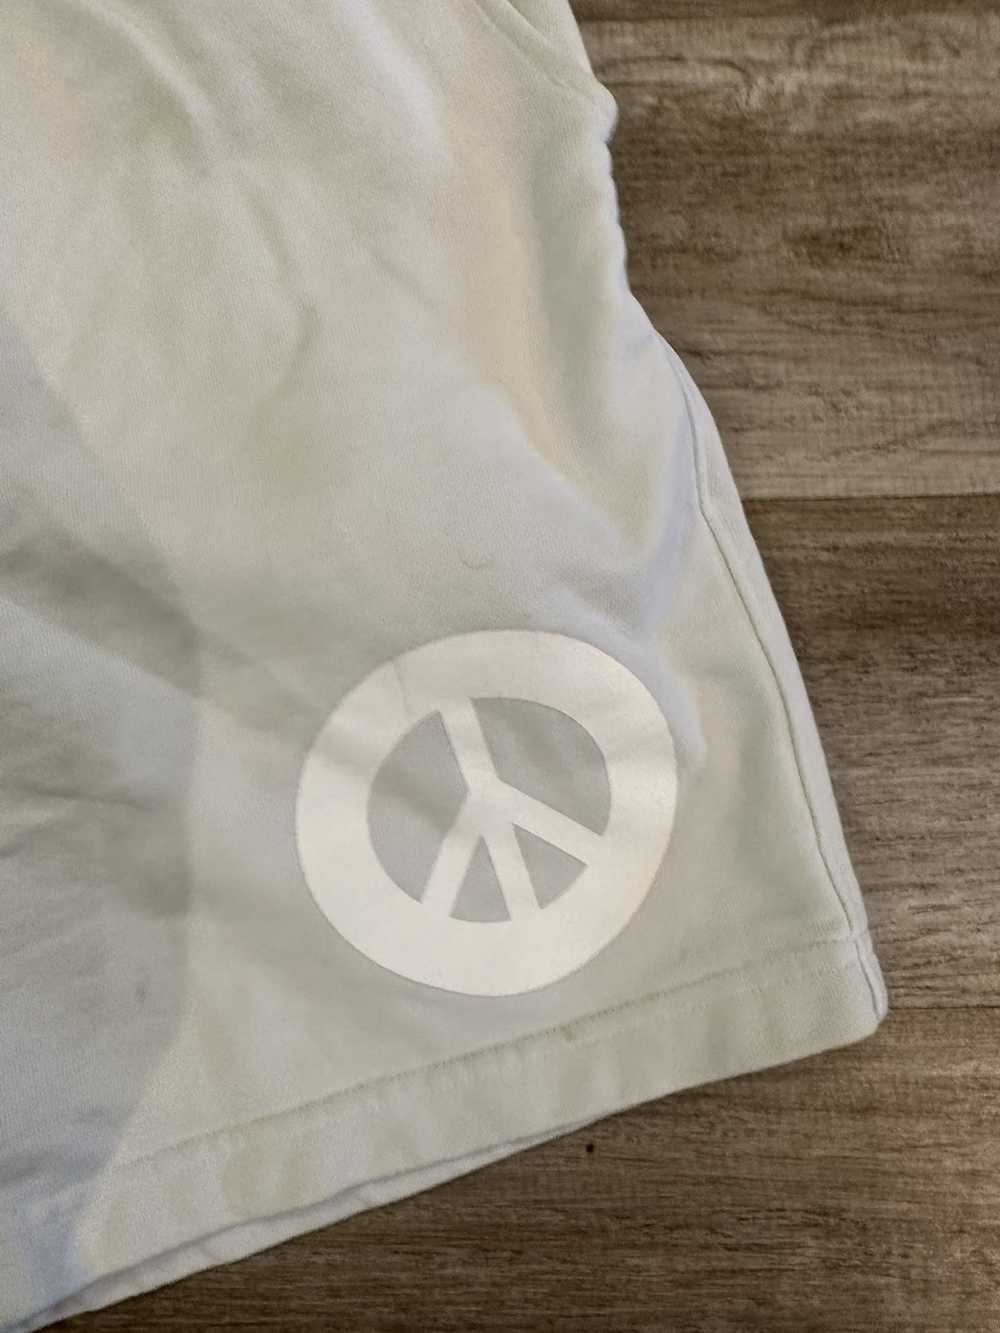 Madhappy Madhappy Peace Shorts Size L - image 2